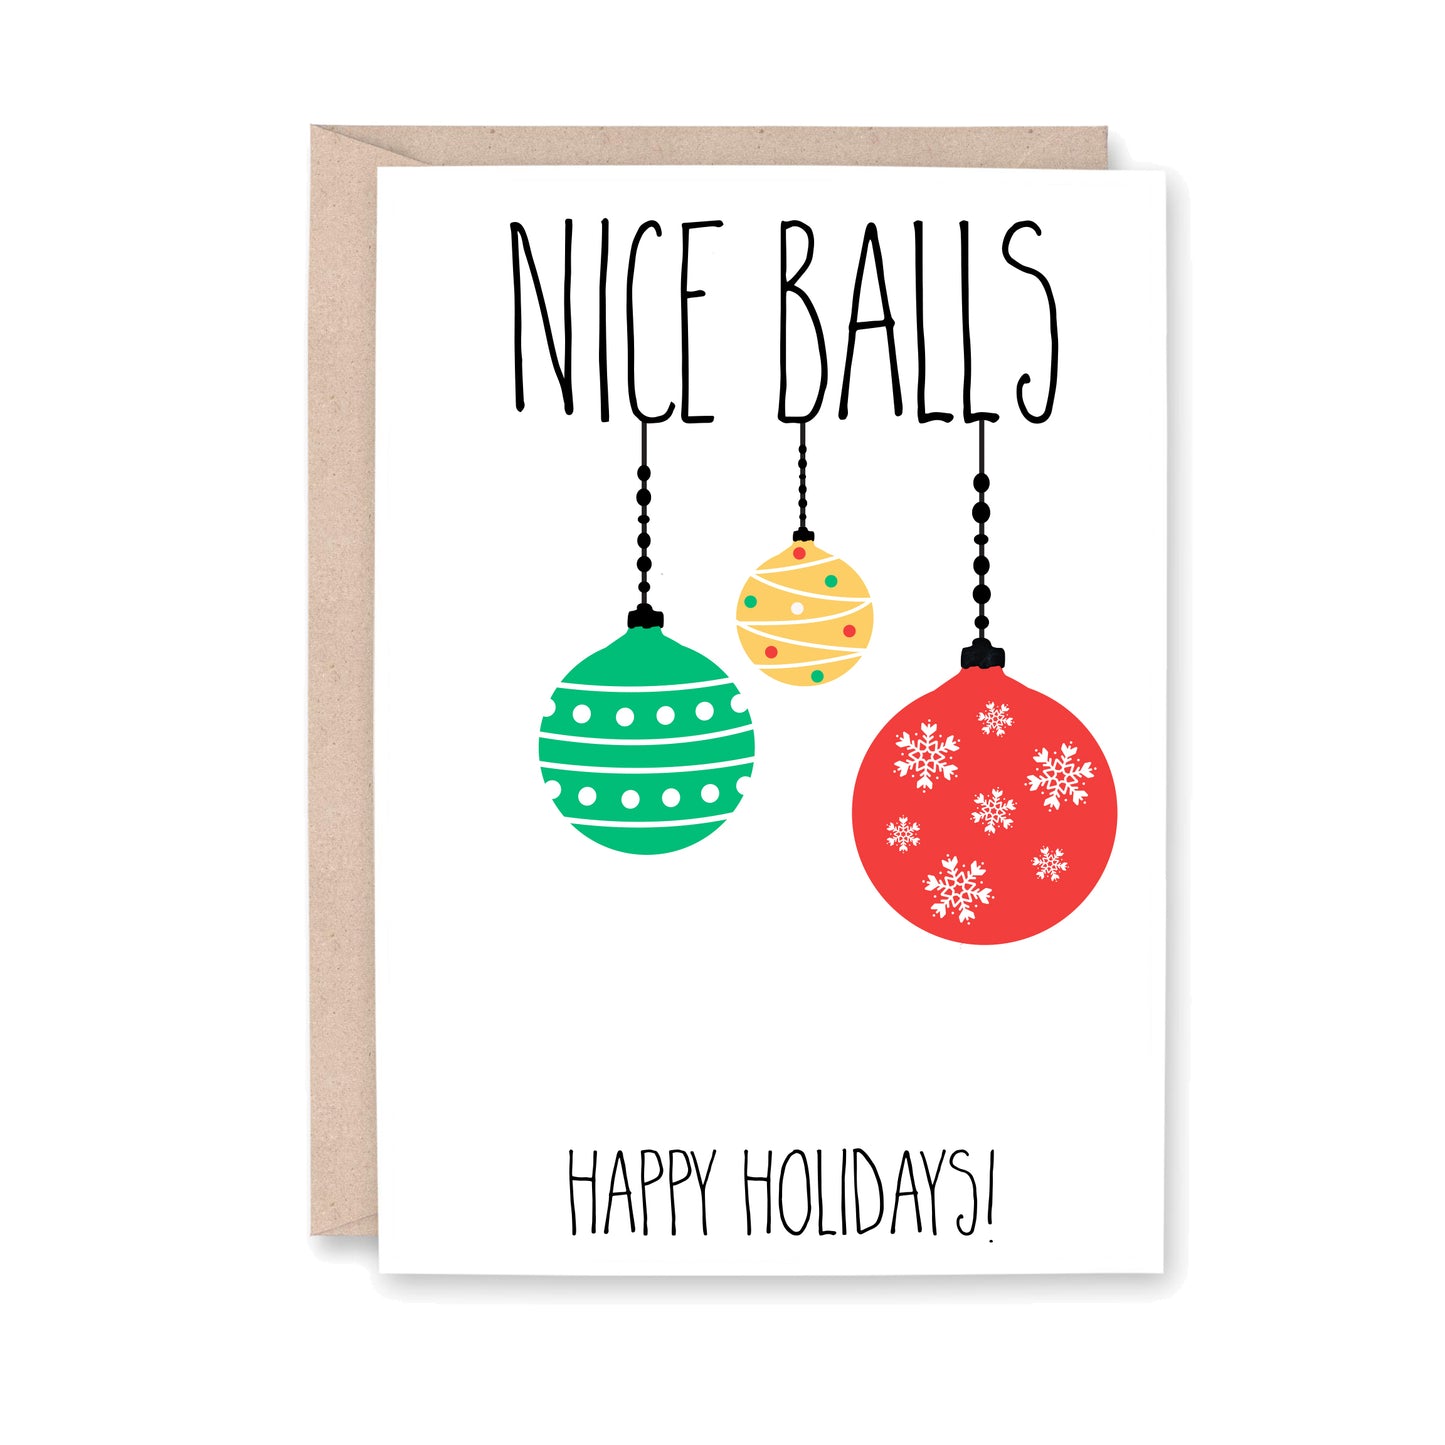 Nice balls Happy Holidays! (pictured with three christmas balls hanging from the words)